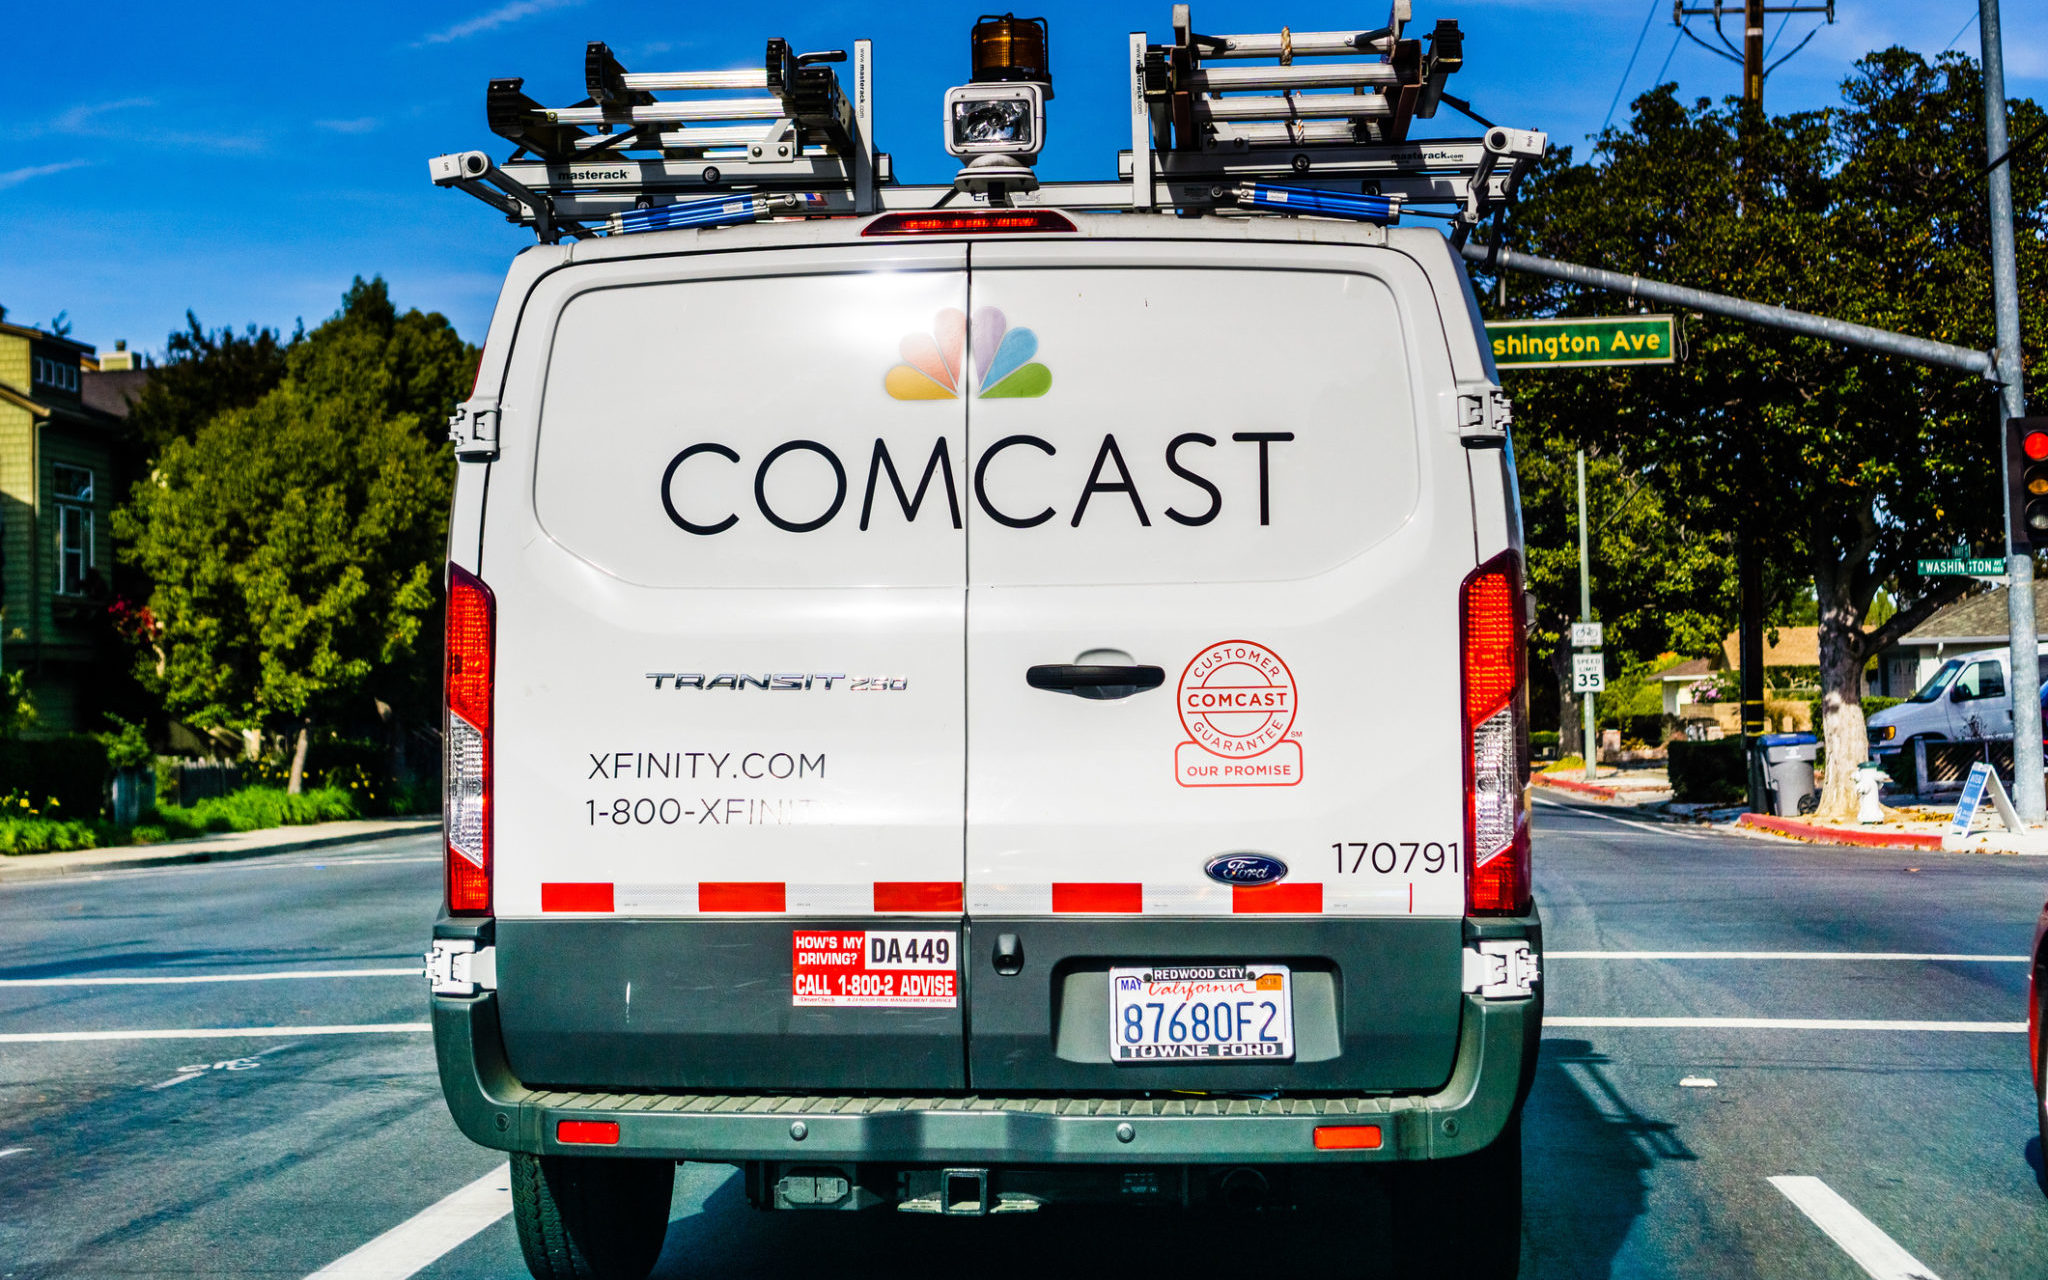 Everything We Know About Comcast’s New $20 Live TV Streaming Service to Fight Cord Cutting Called Now TV